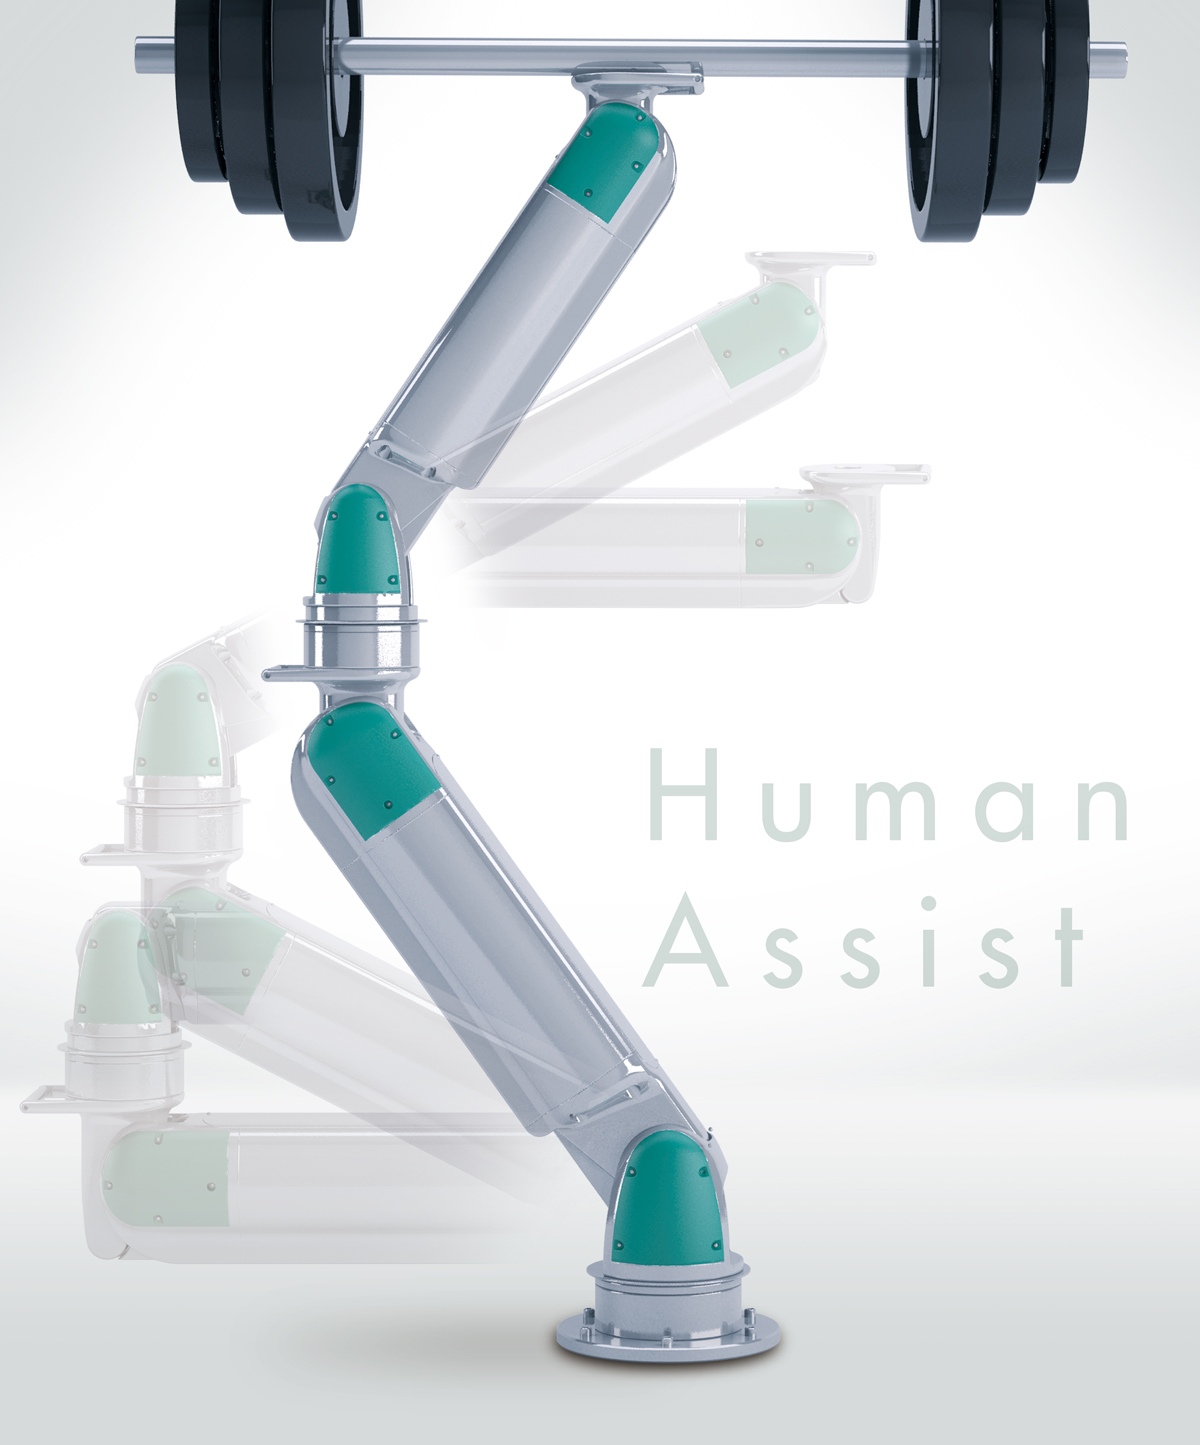 New options added to the Human Assist components